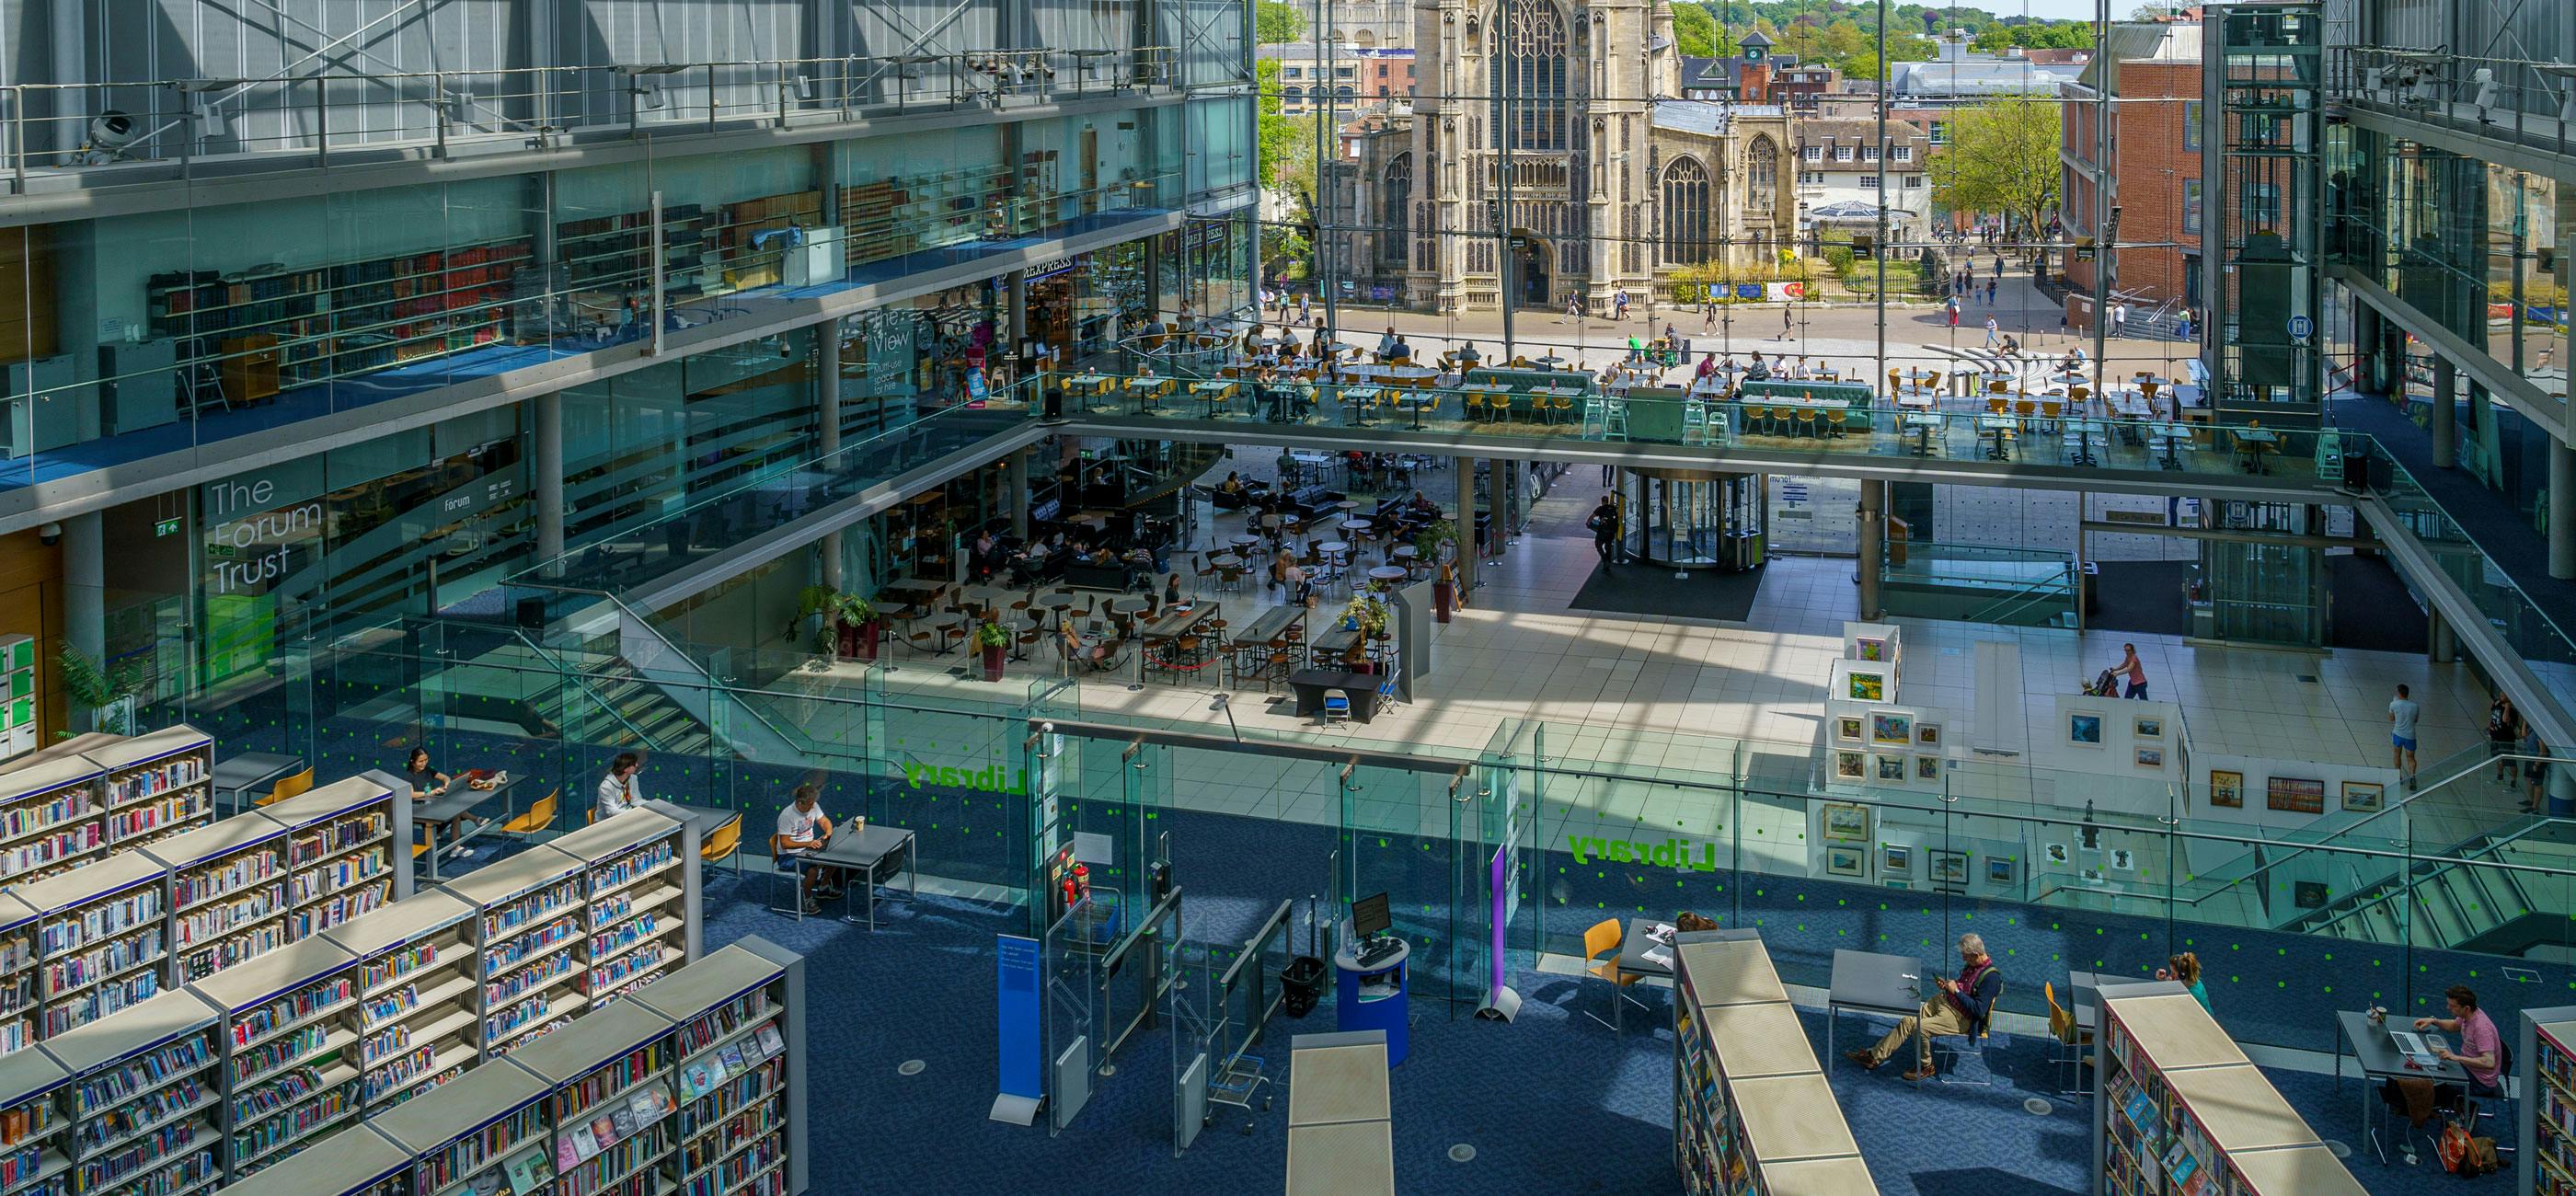 Looking down onto the First Floor of the Millennium Library, a modern building with glass frontage.